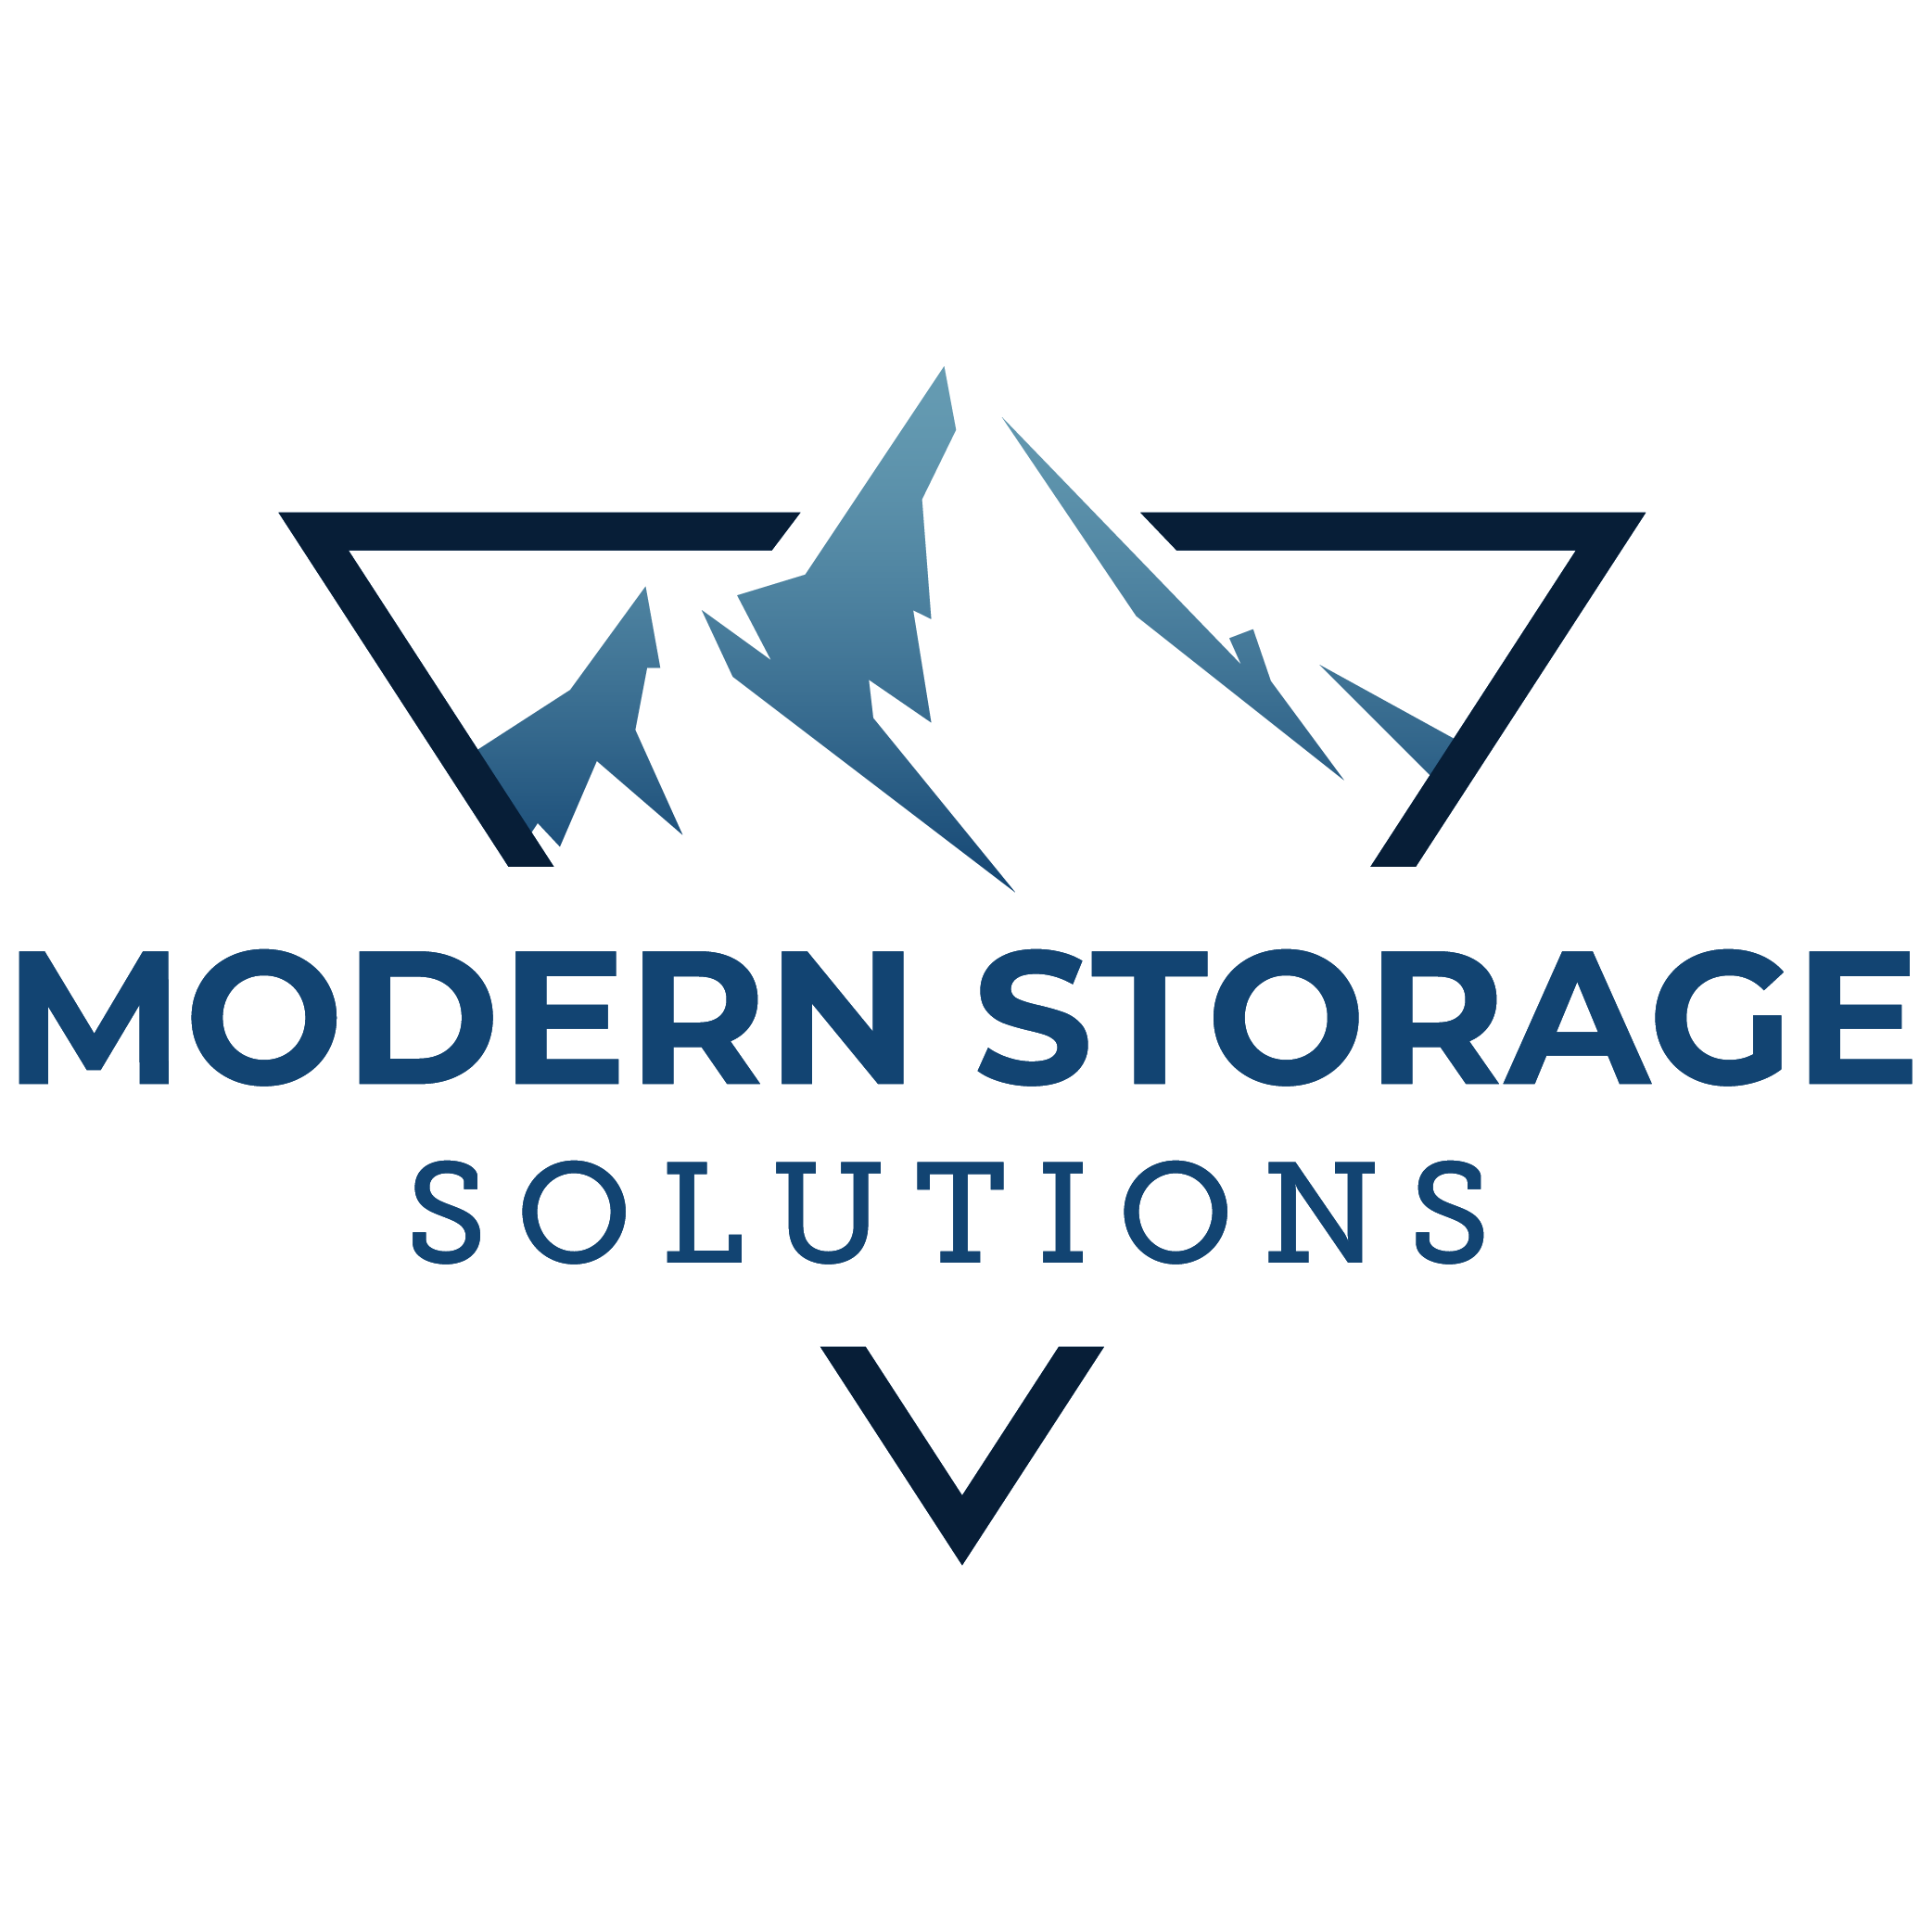 Modern Storage Solutions - Florence, MT 59833 - (406)416-5360 | ShowMeLocal.com